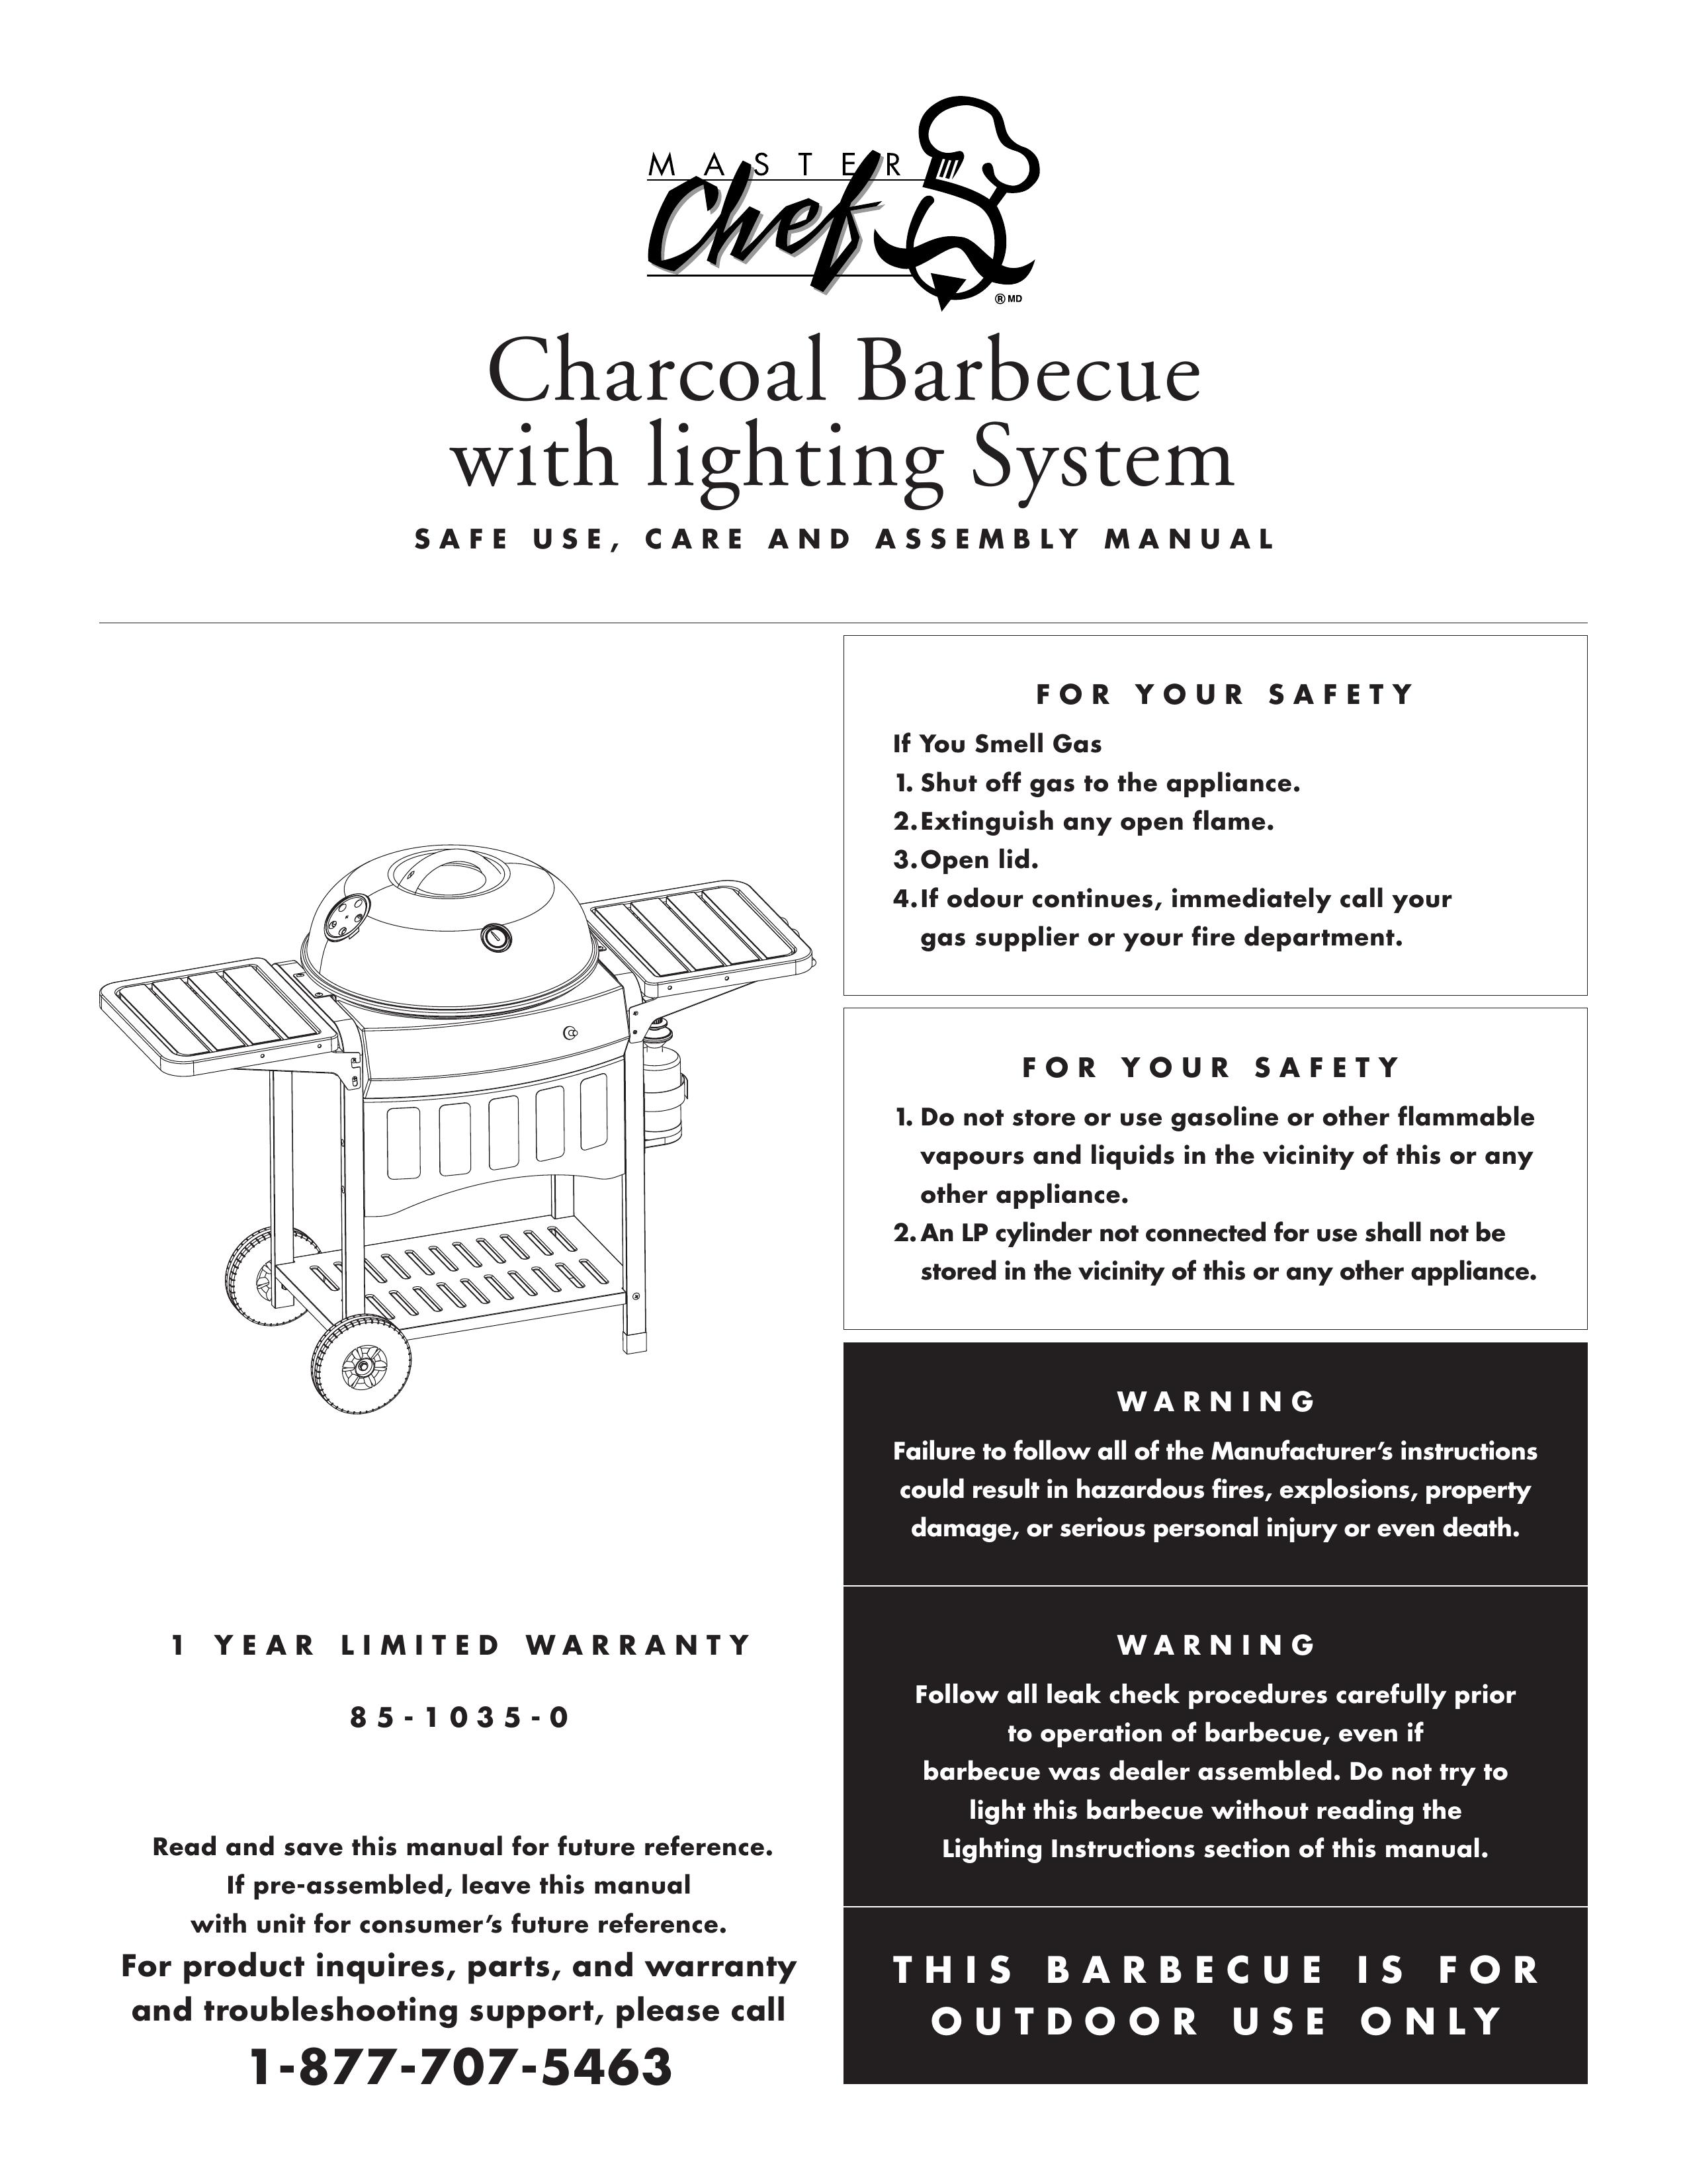 Master Chef 85-1035-0 Charcoal Grill User Manual